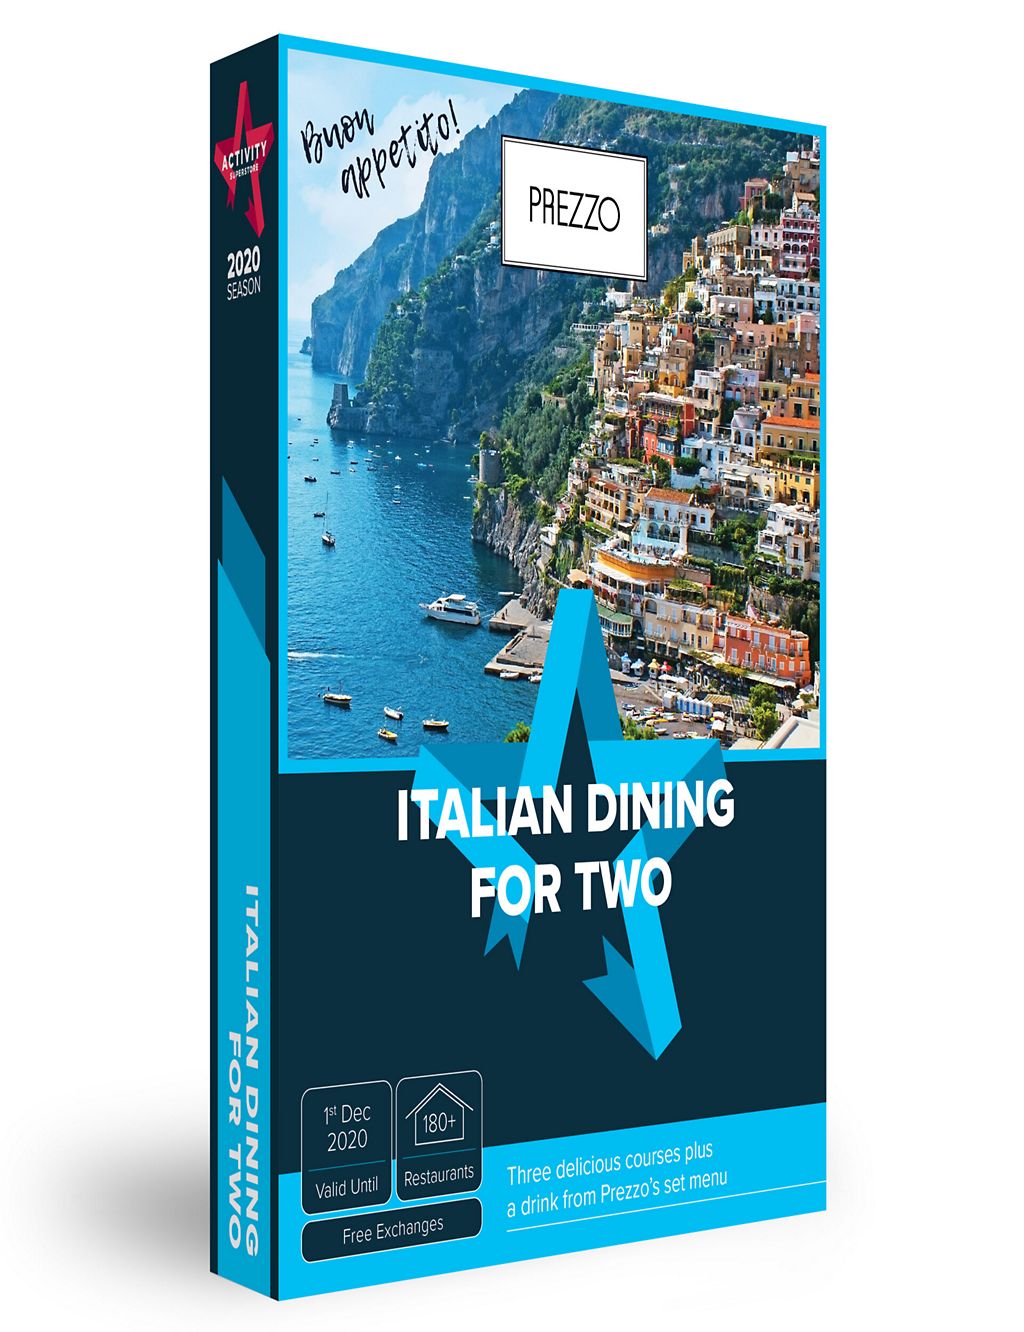 Italian Dining - Gift Experience Voucher 3 of 3